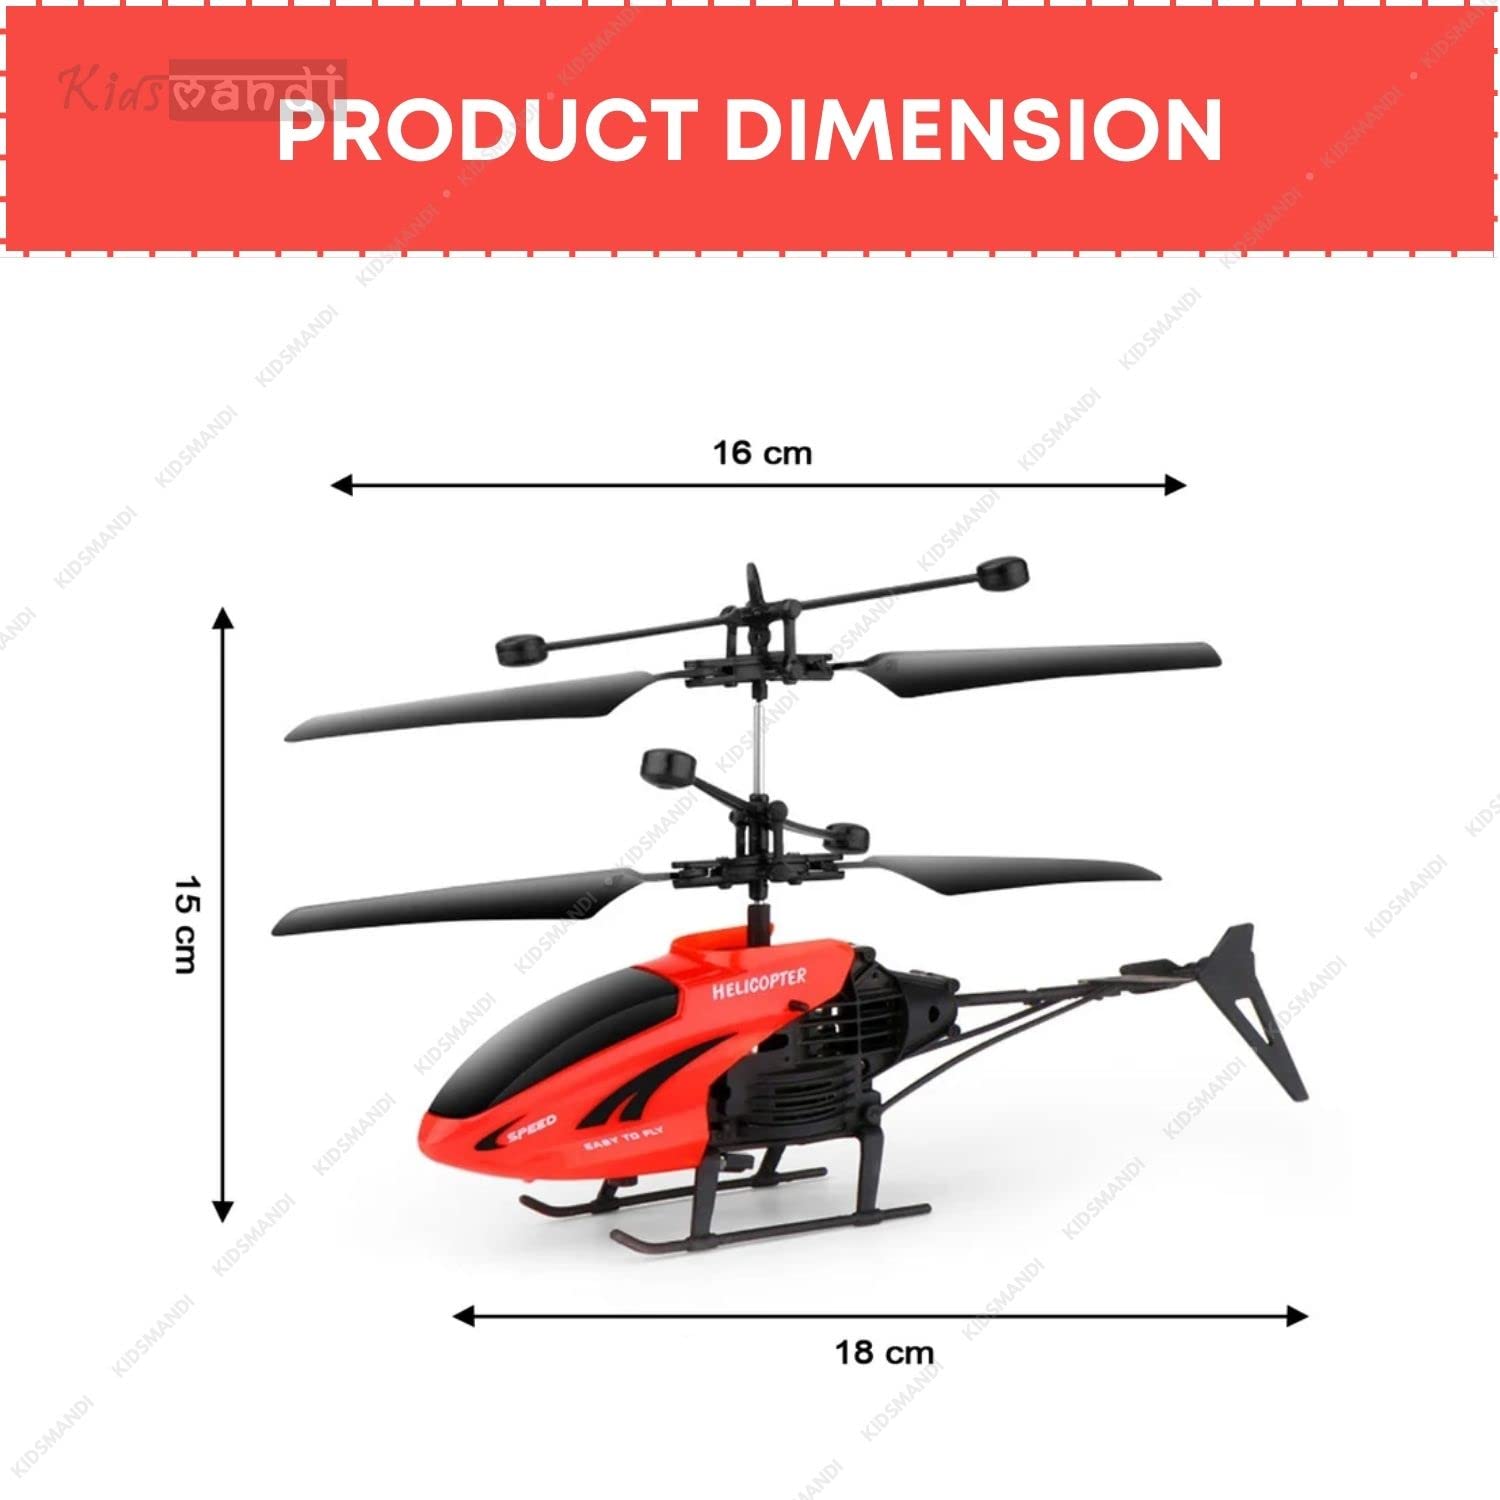 Kids Mandi Remote Control Helicopter for indoor and outdoor play.